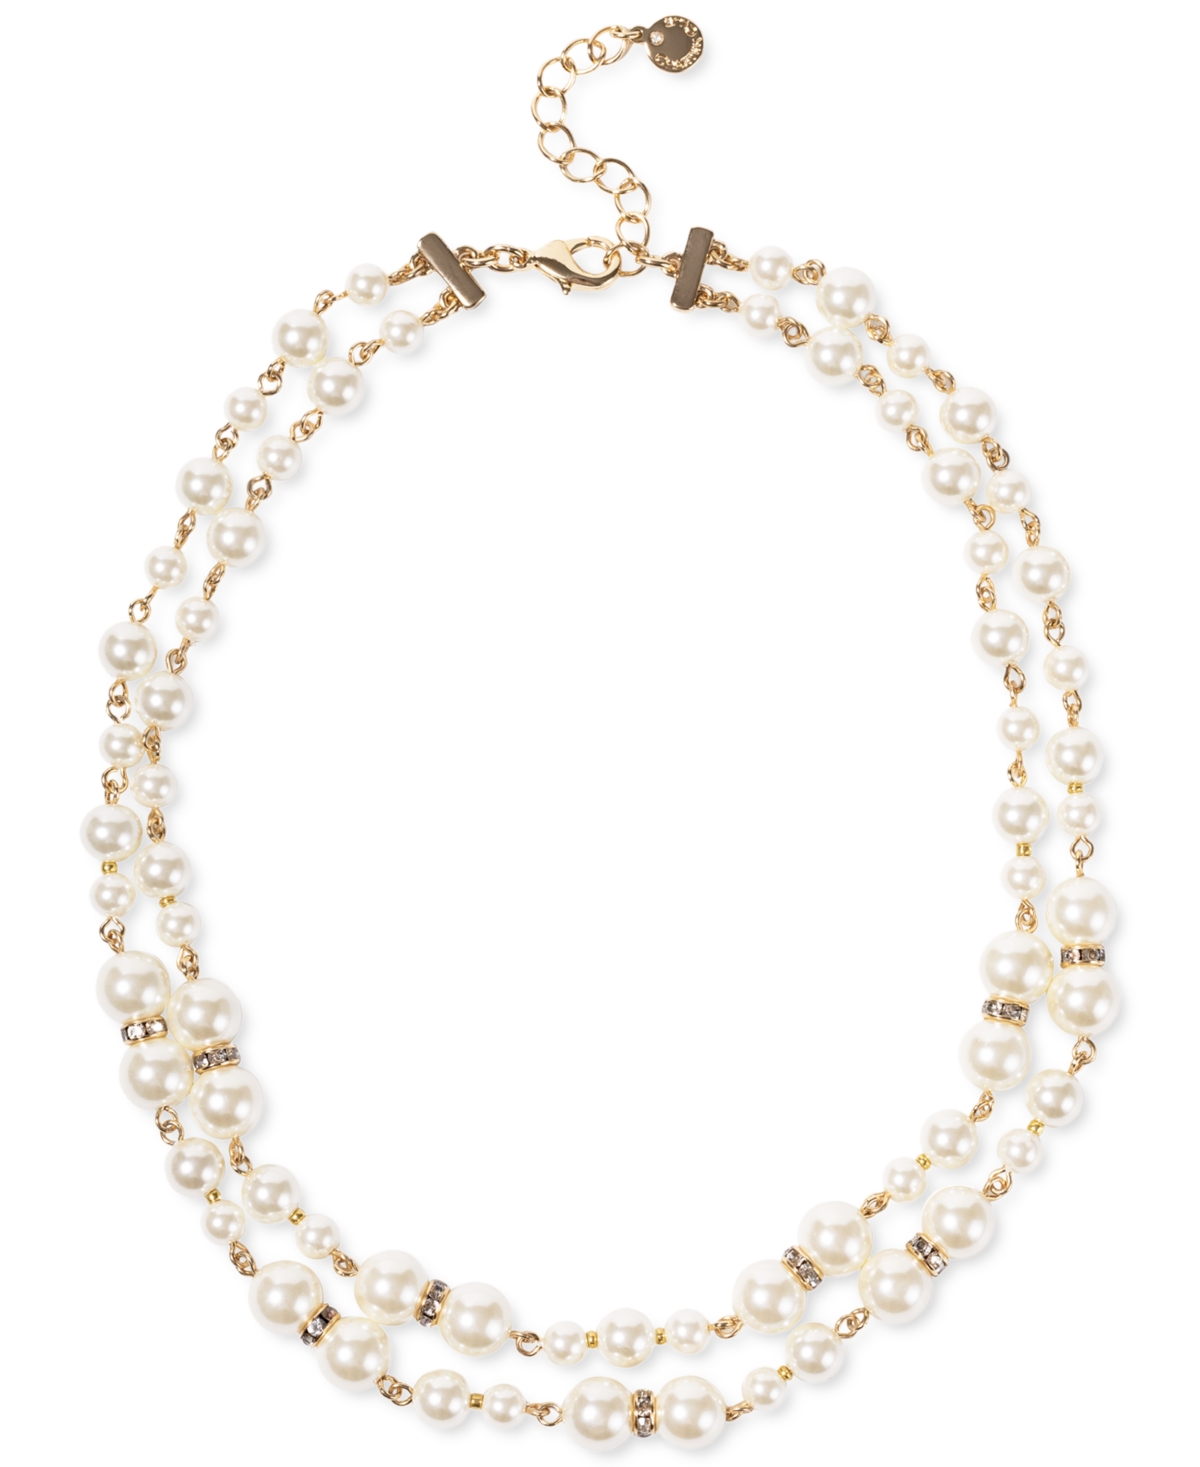 Gold-Tone Pave Rondelle Bead & Imitation Pearl Layered Strand Necklace, 17" + 2" extender, Created for Macy's - White